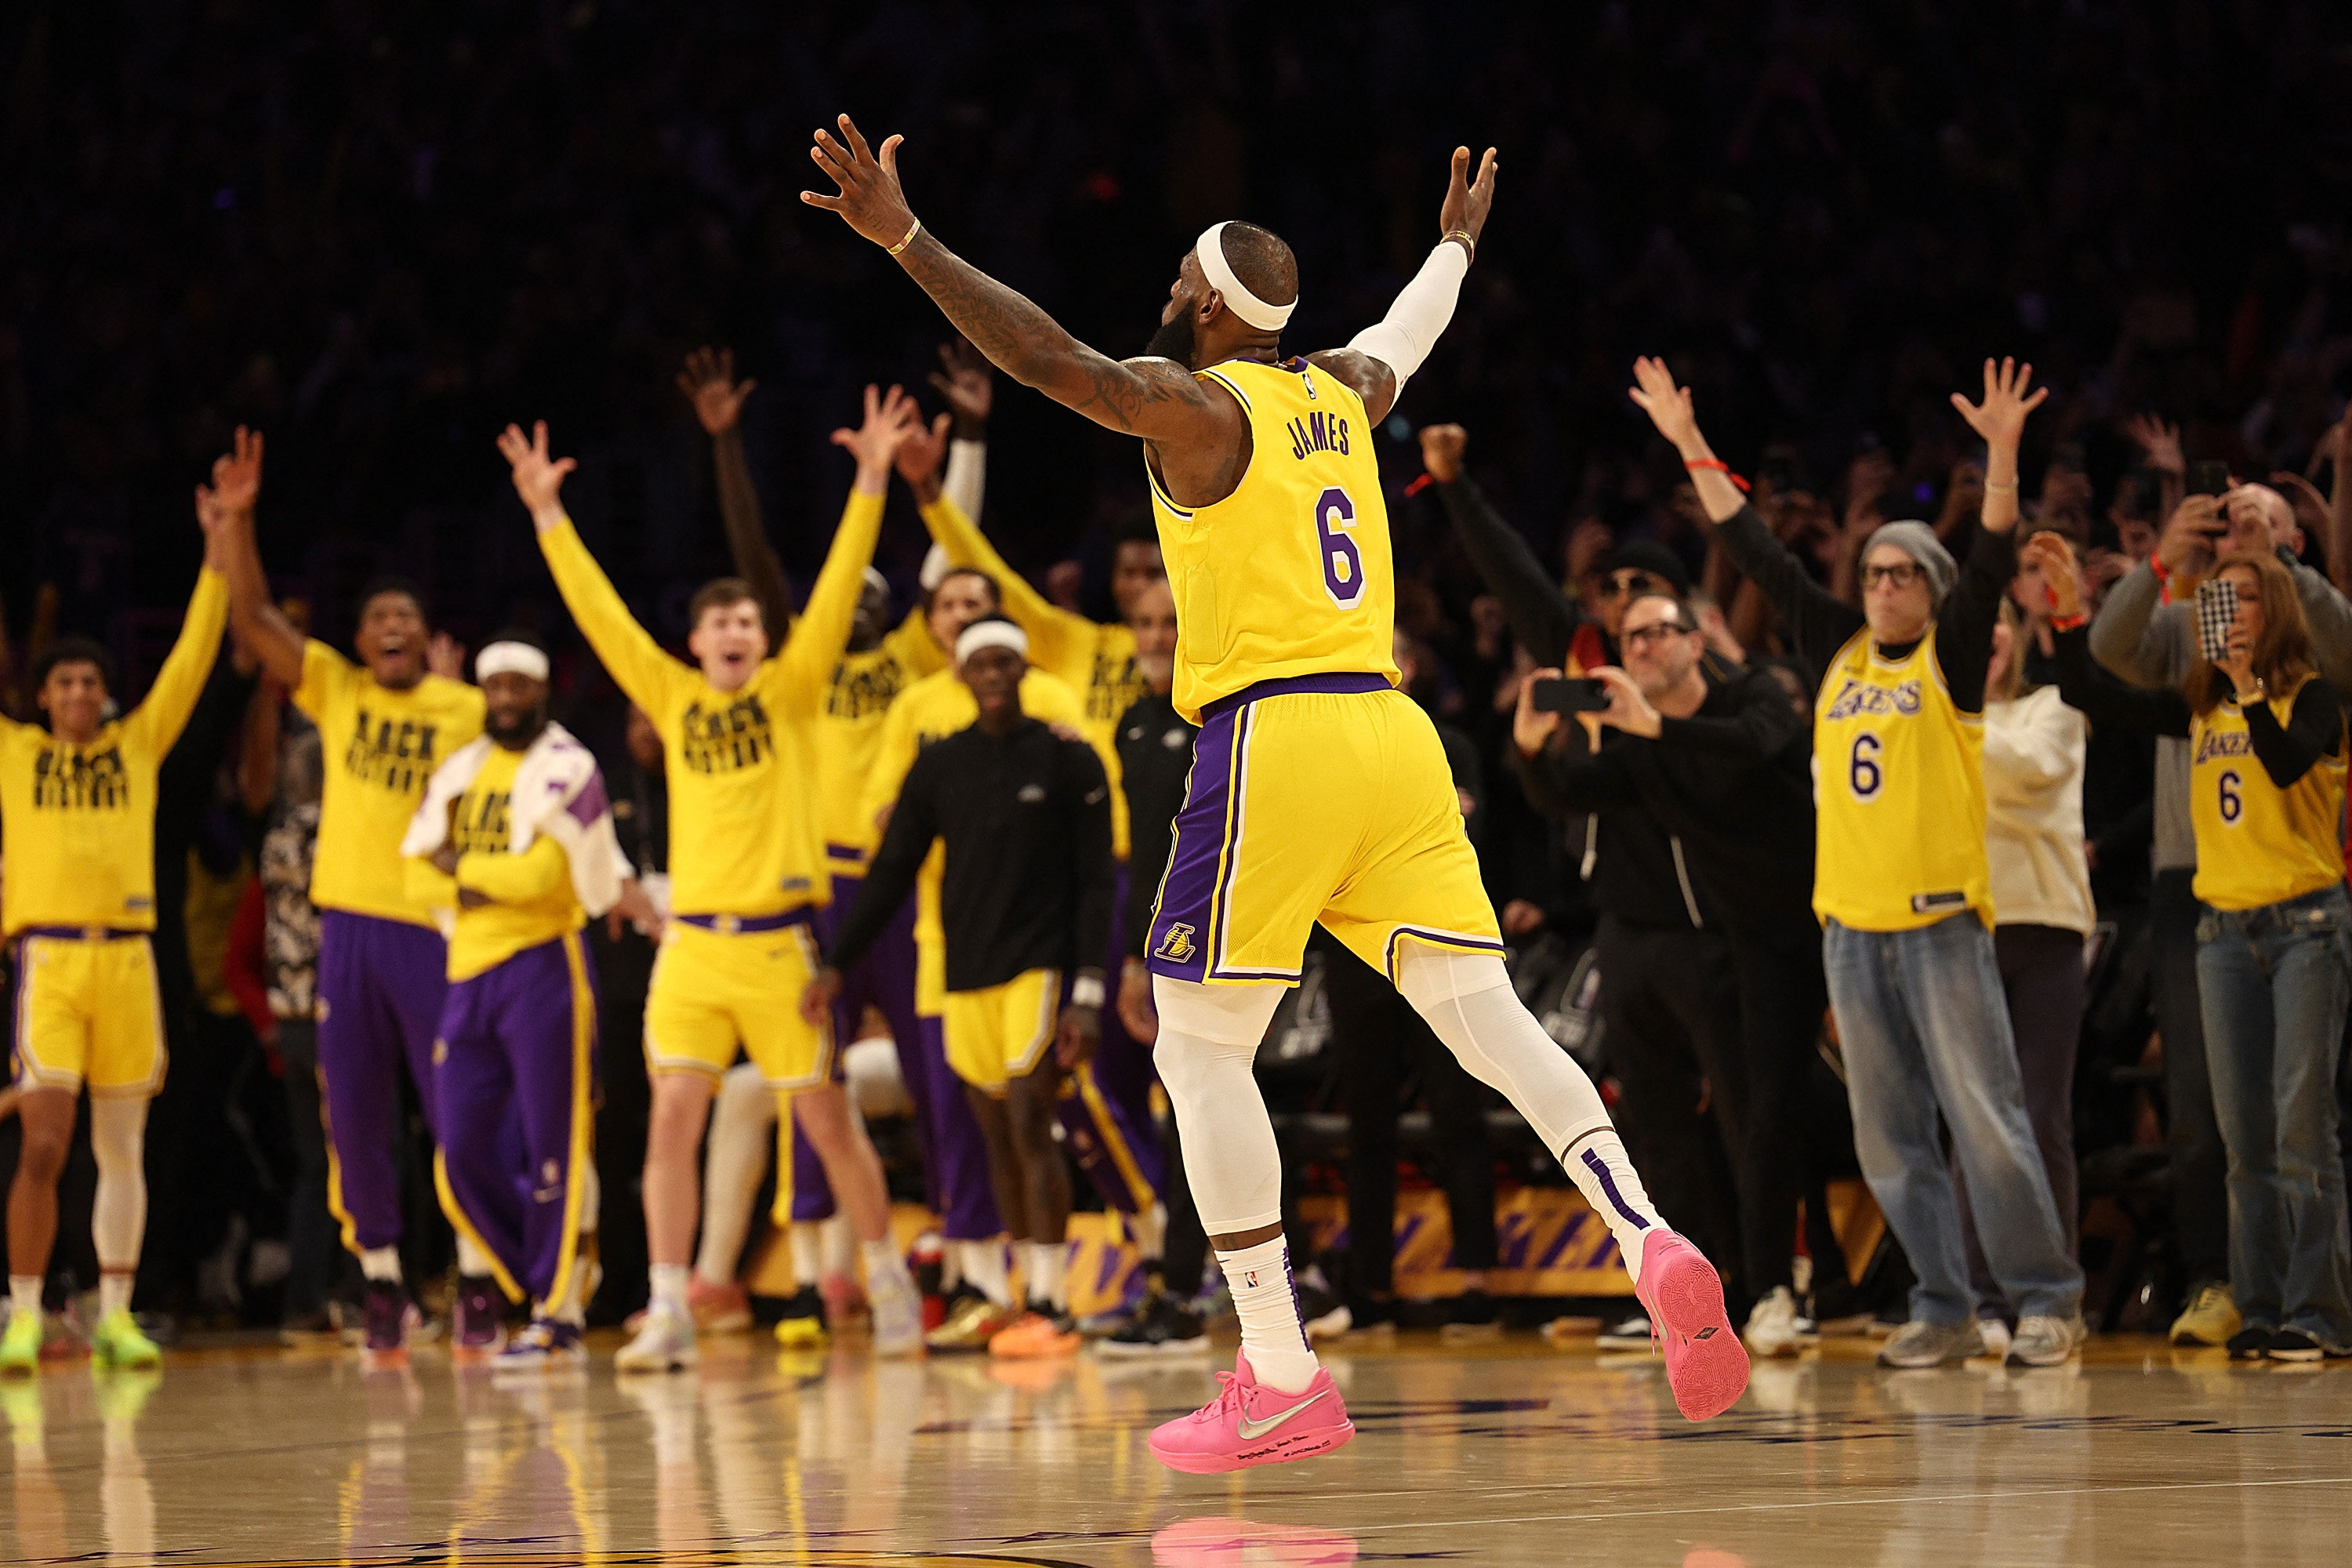 LeBron James of the Los Angeles Lakers celebrates after scoring to pass Kareem Abdul-Jabbar to become the NBA’s all-time leading scorer. Photo: AFP